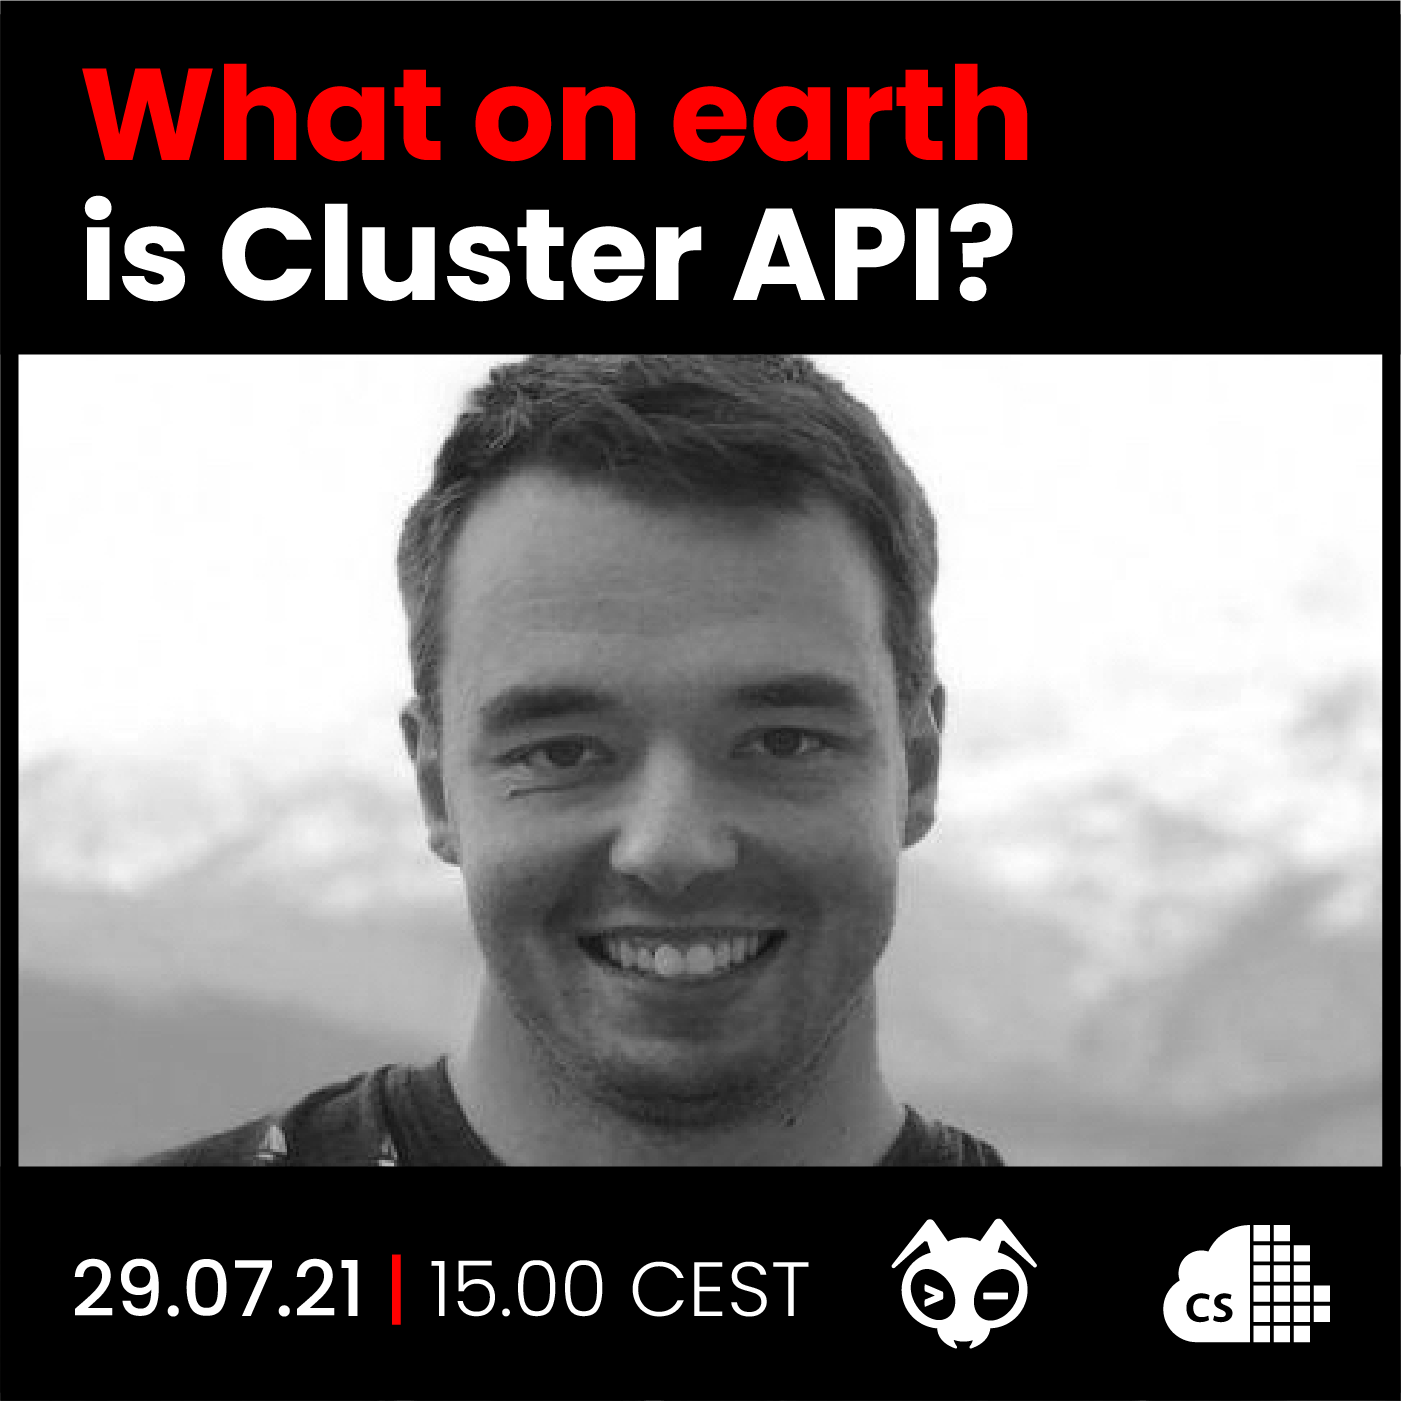 What on earth is cluster api?